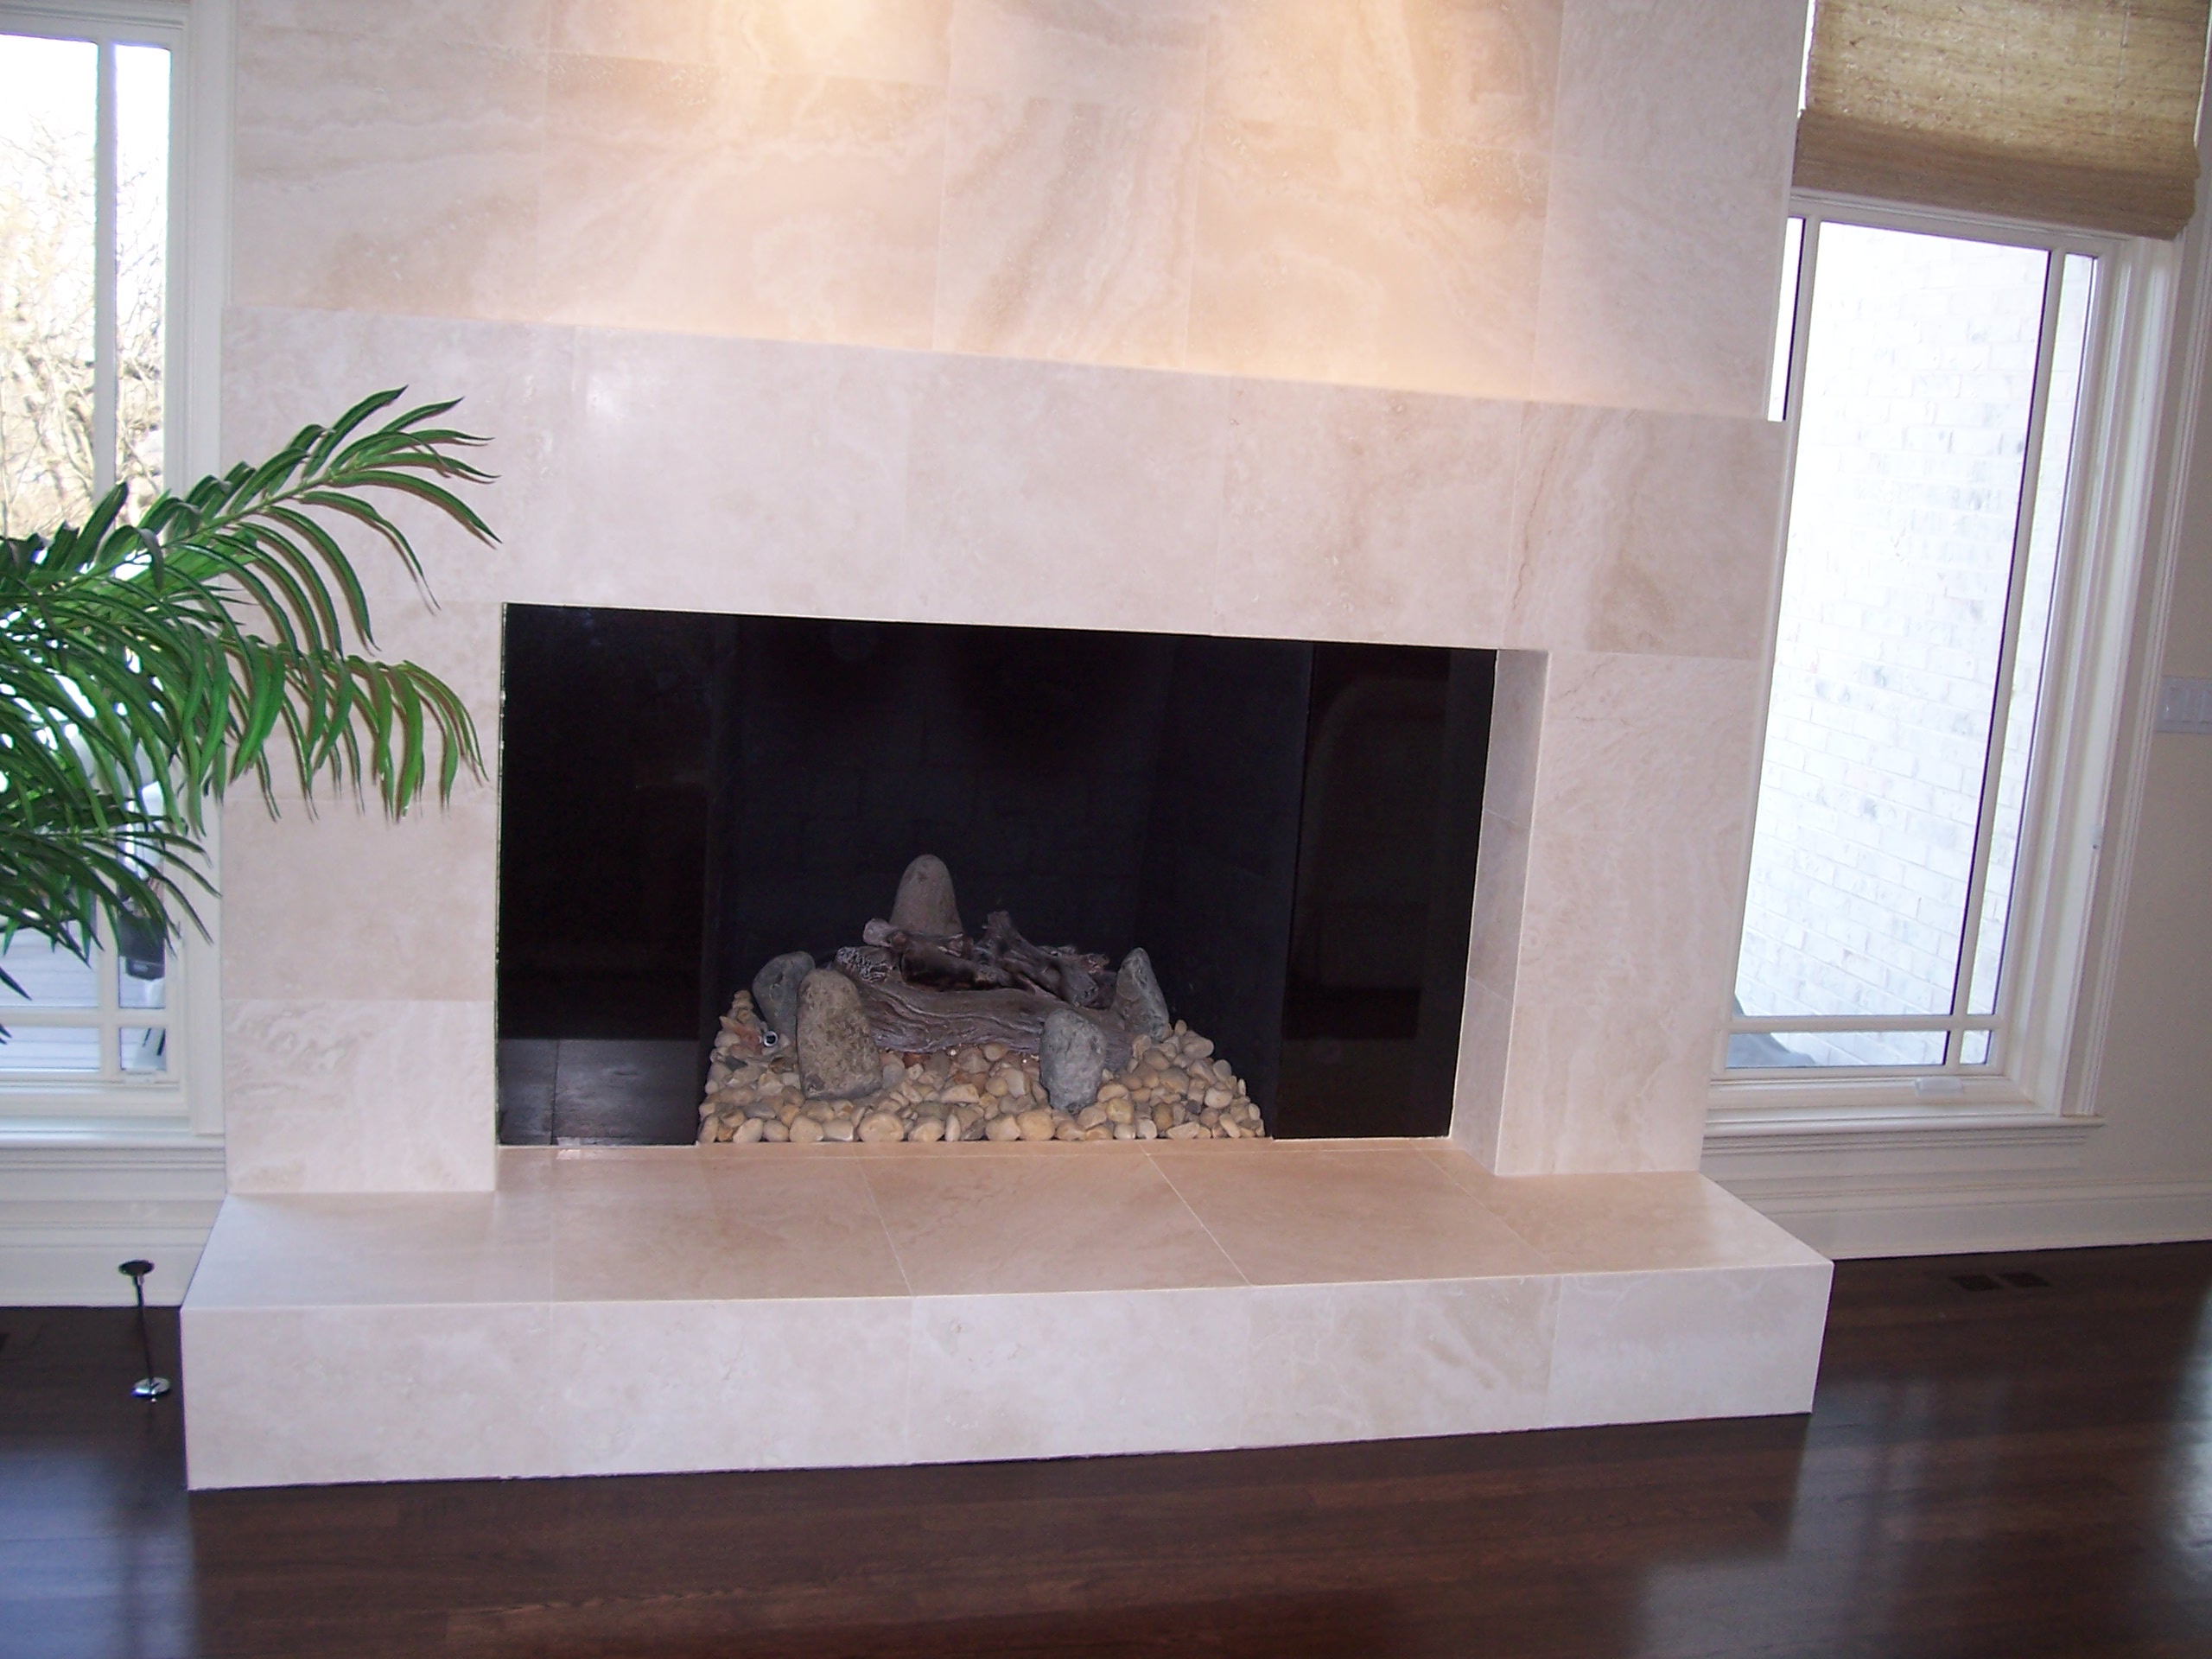 Nothing is more personal than a custom-designed fireplace. The appearance of a well-crafted wall unit with stone tiles and mantle can dominate the entire living